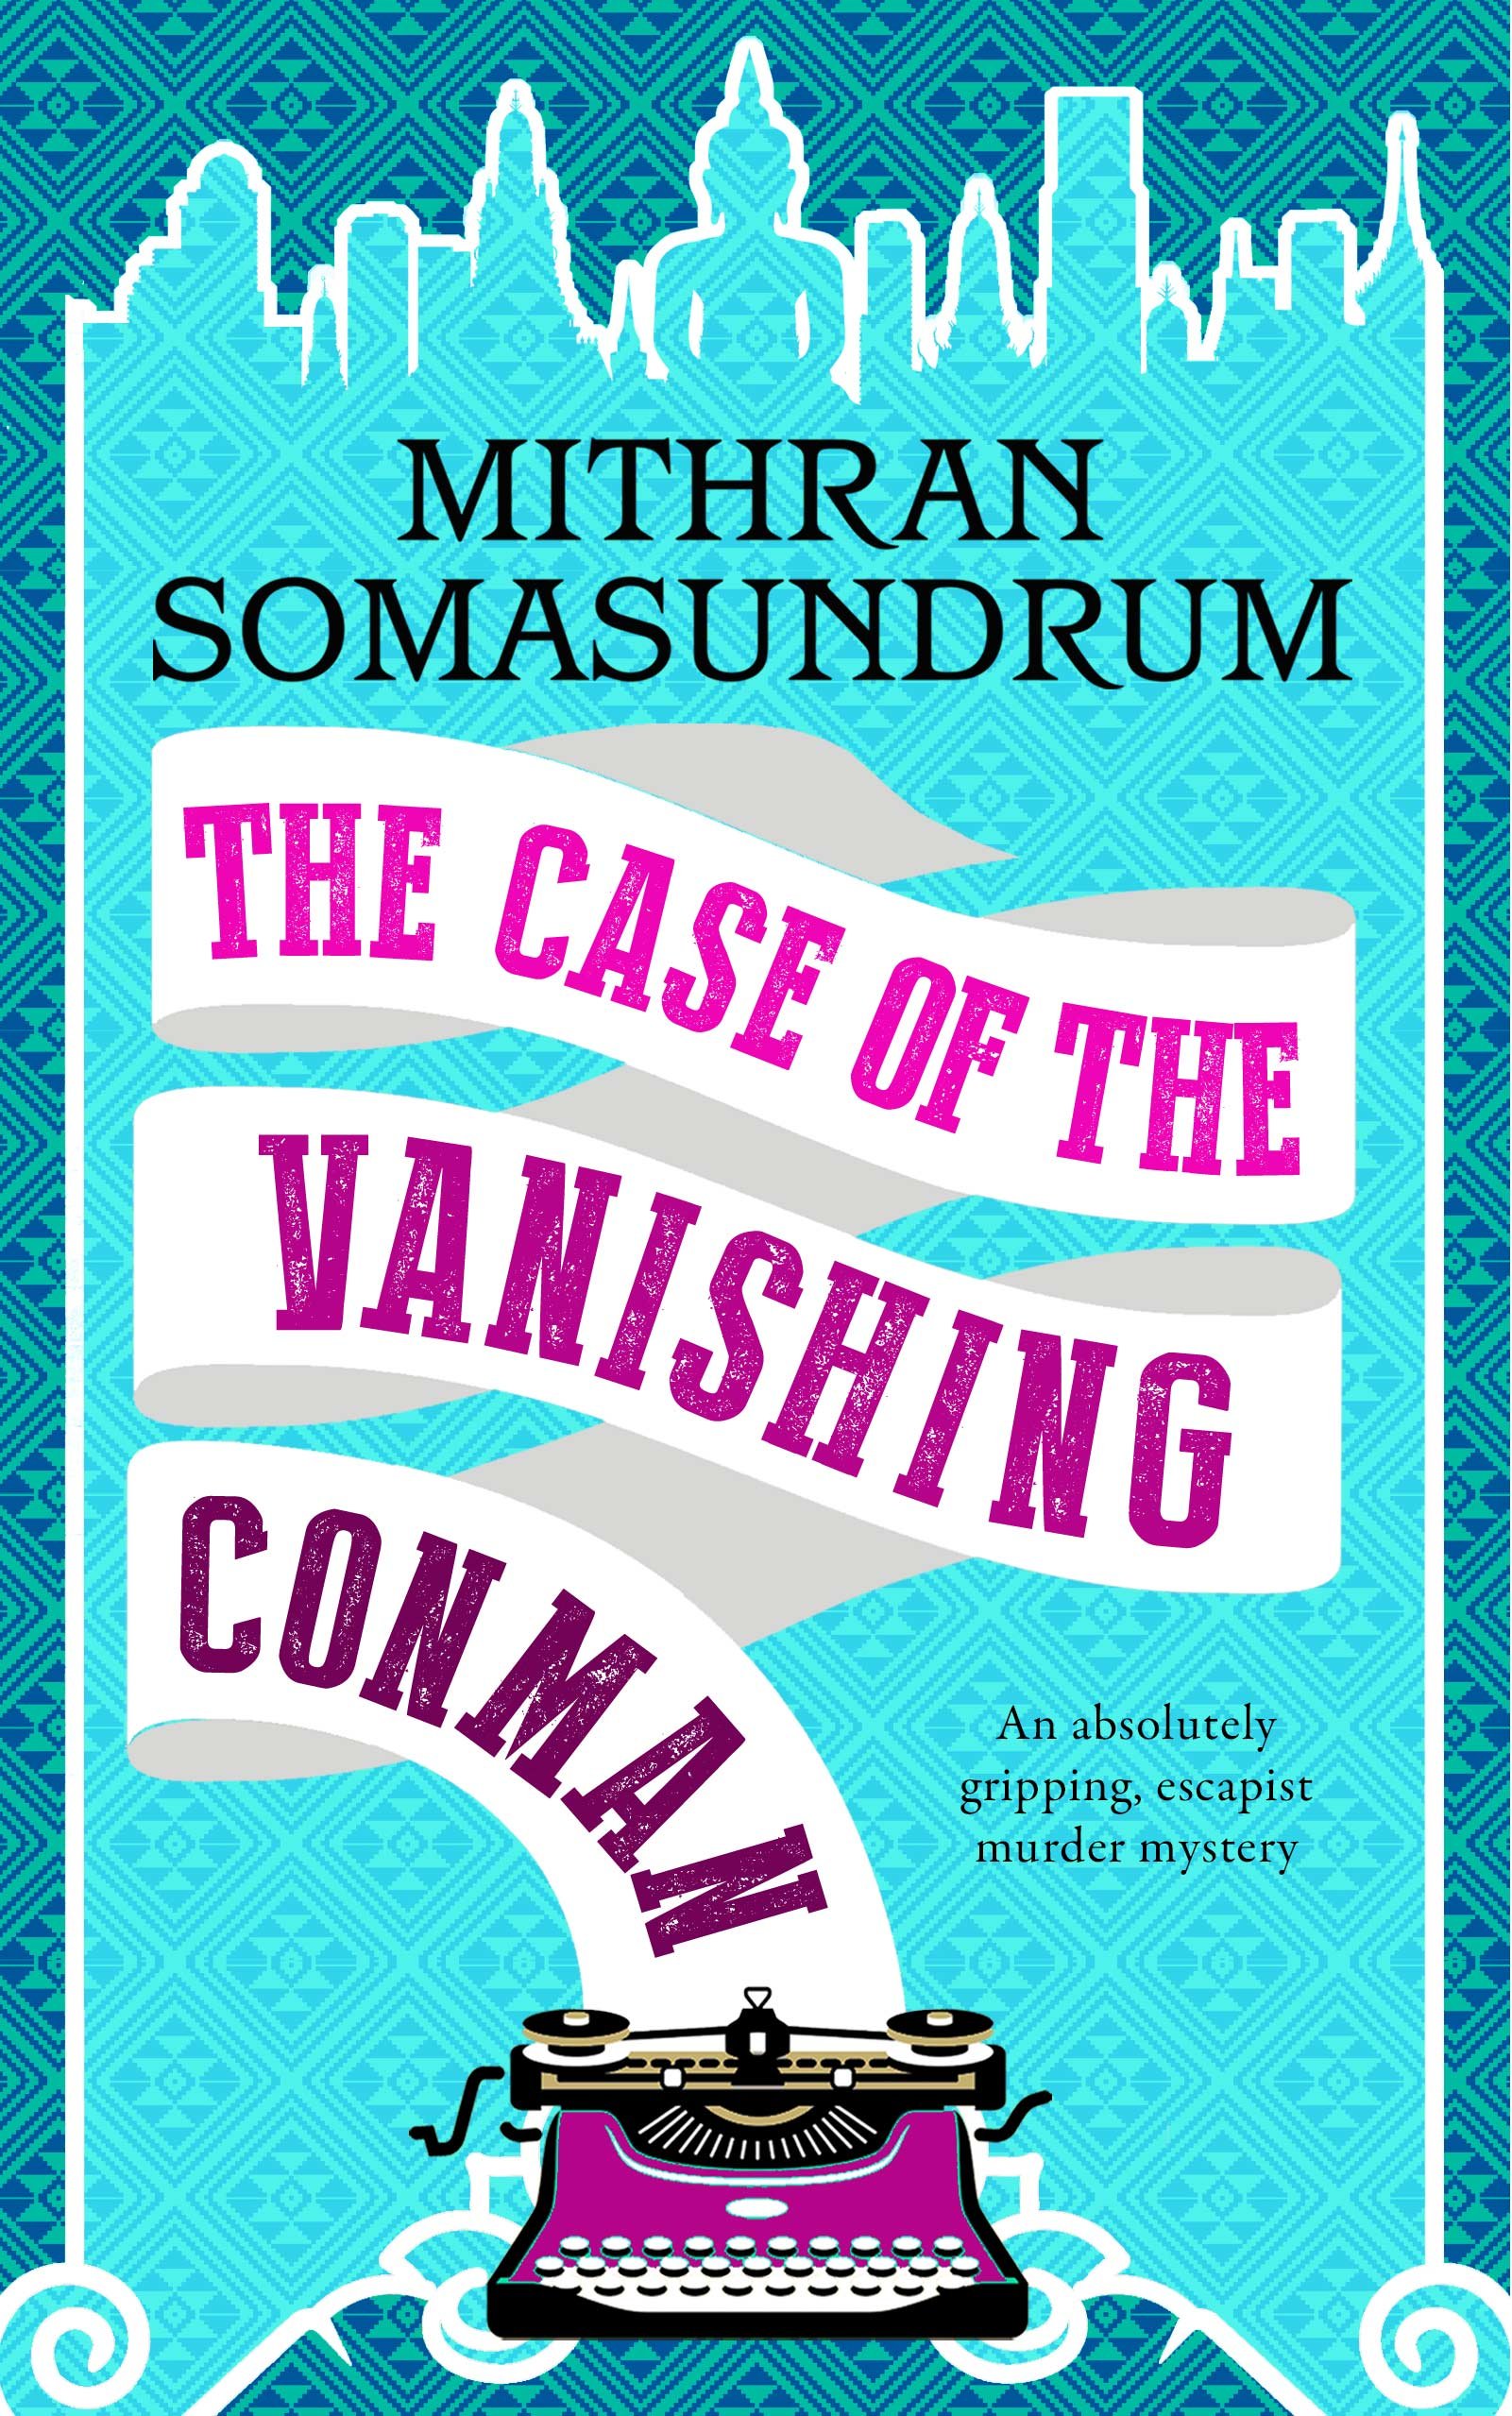 THE CASE OF THE VANISHING CONMAN Cover publish 635KB.jpg